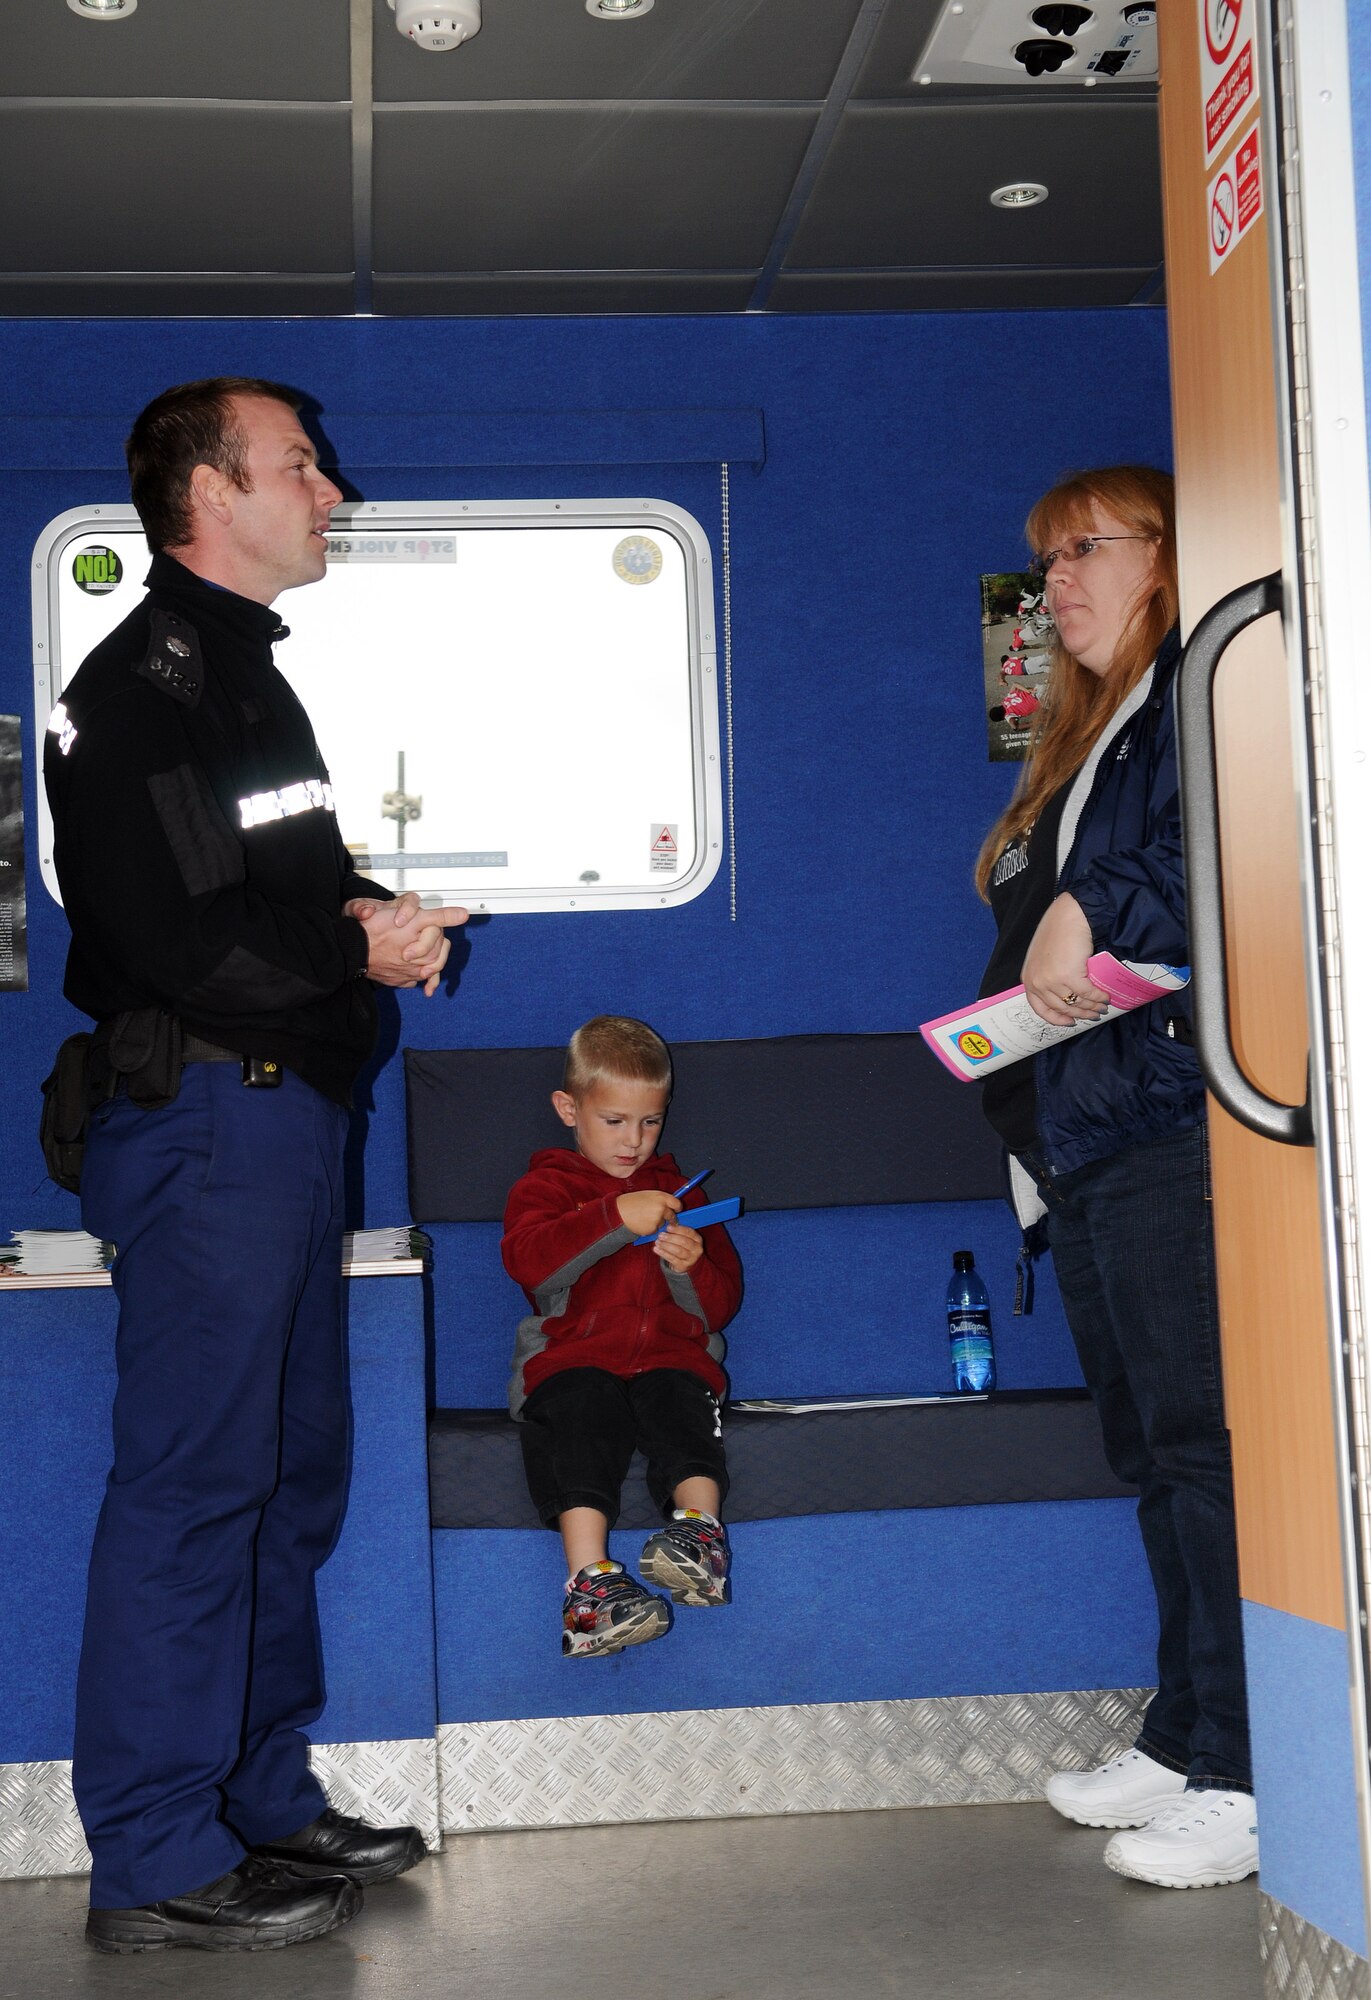 RAF MILDENHALL, England -- Police Community Service Officer Gavin Tampin talks to Mollie Haag and her son Ryan, 5, at a Community Engagement Day Sept. 13. Seven local law enforcement agencies converged at the BXtra here to meet military members and their families who live in the neighborhoods they patrol. The event is scheduled to be held quarterly at RAFs Mildenhall and Lakenheath, said event organizer Ministry of Defence Police Constable Paul Glover, community safety and crime reduction officer. (U.S. Air Force photo/Senior Airman Thomas Trower)